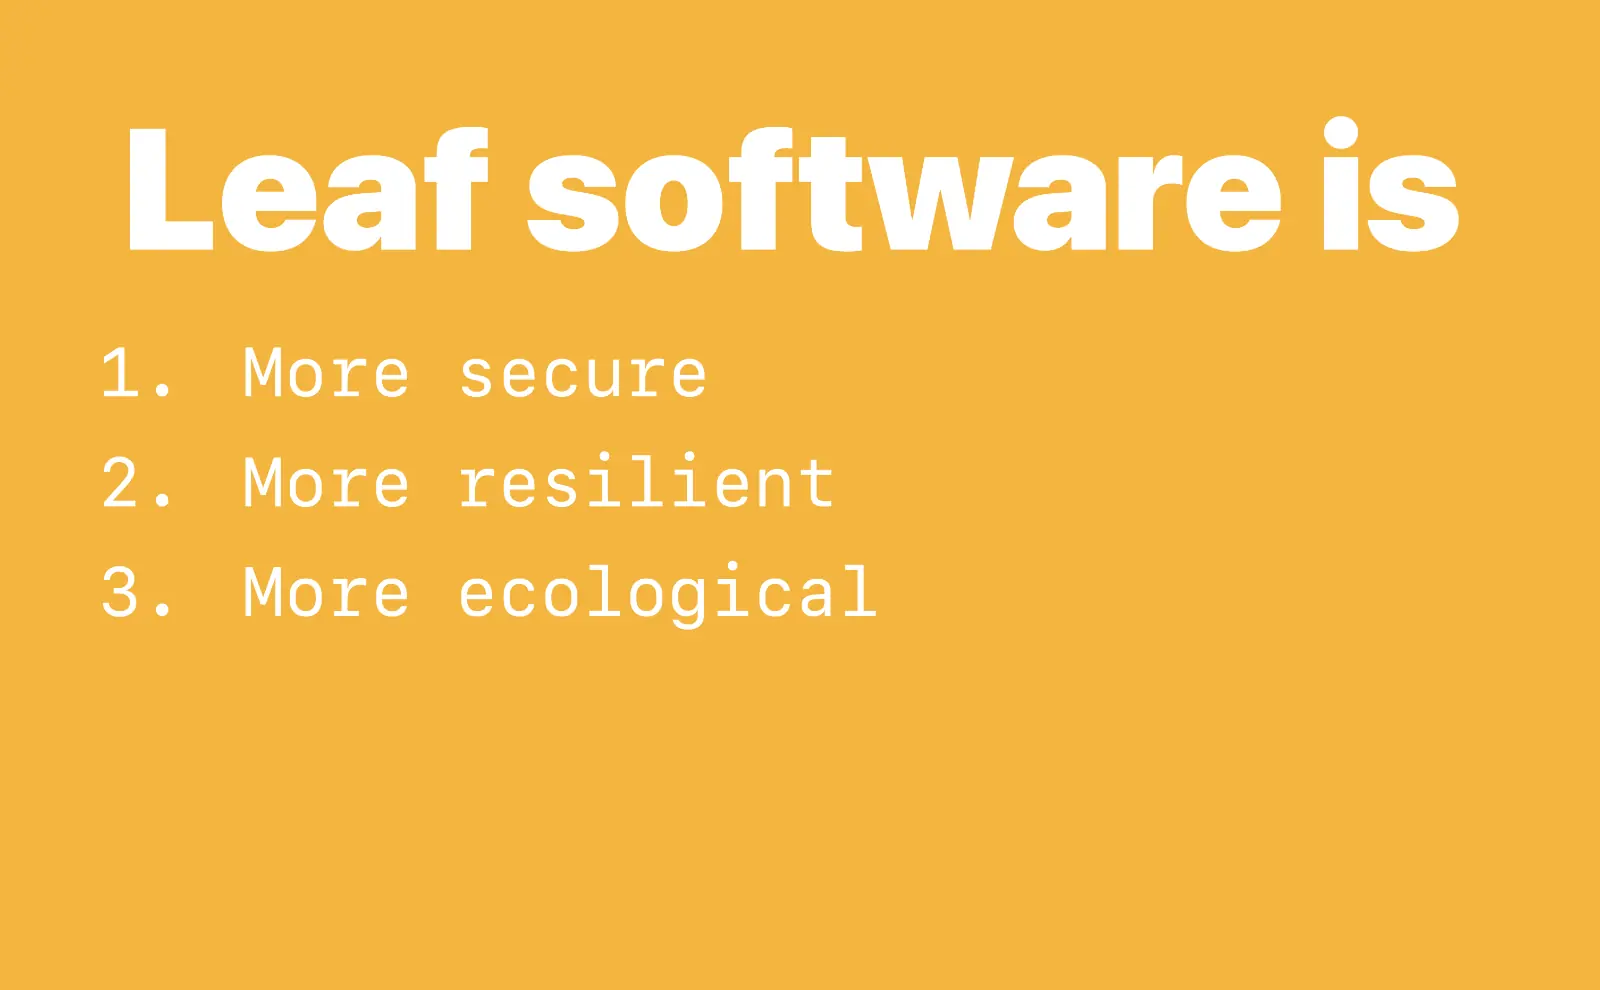 Leaf software is 1. More secure. 2. More resilient. 3. More ecological.